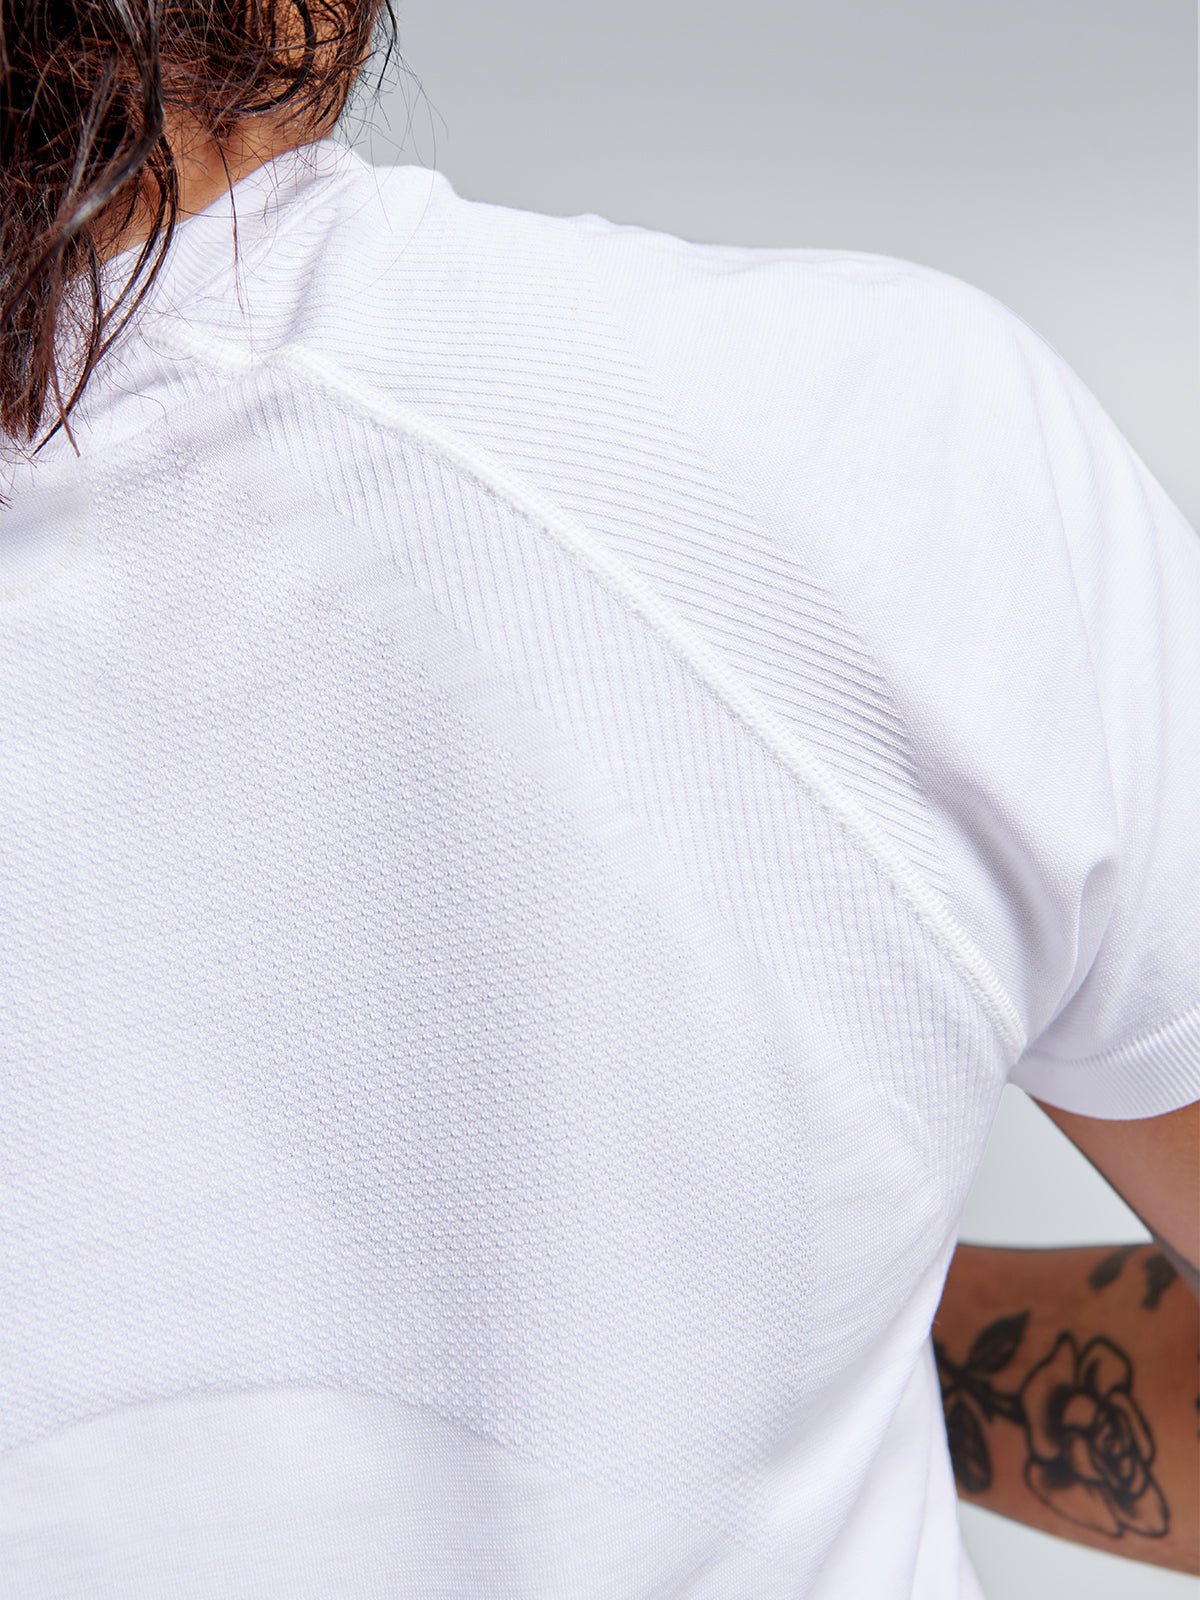 HERE TODAY Cropped Tee White